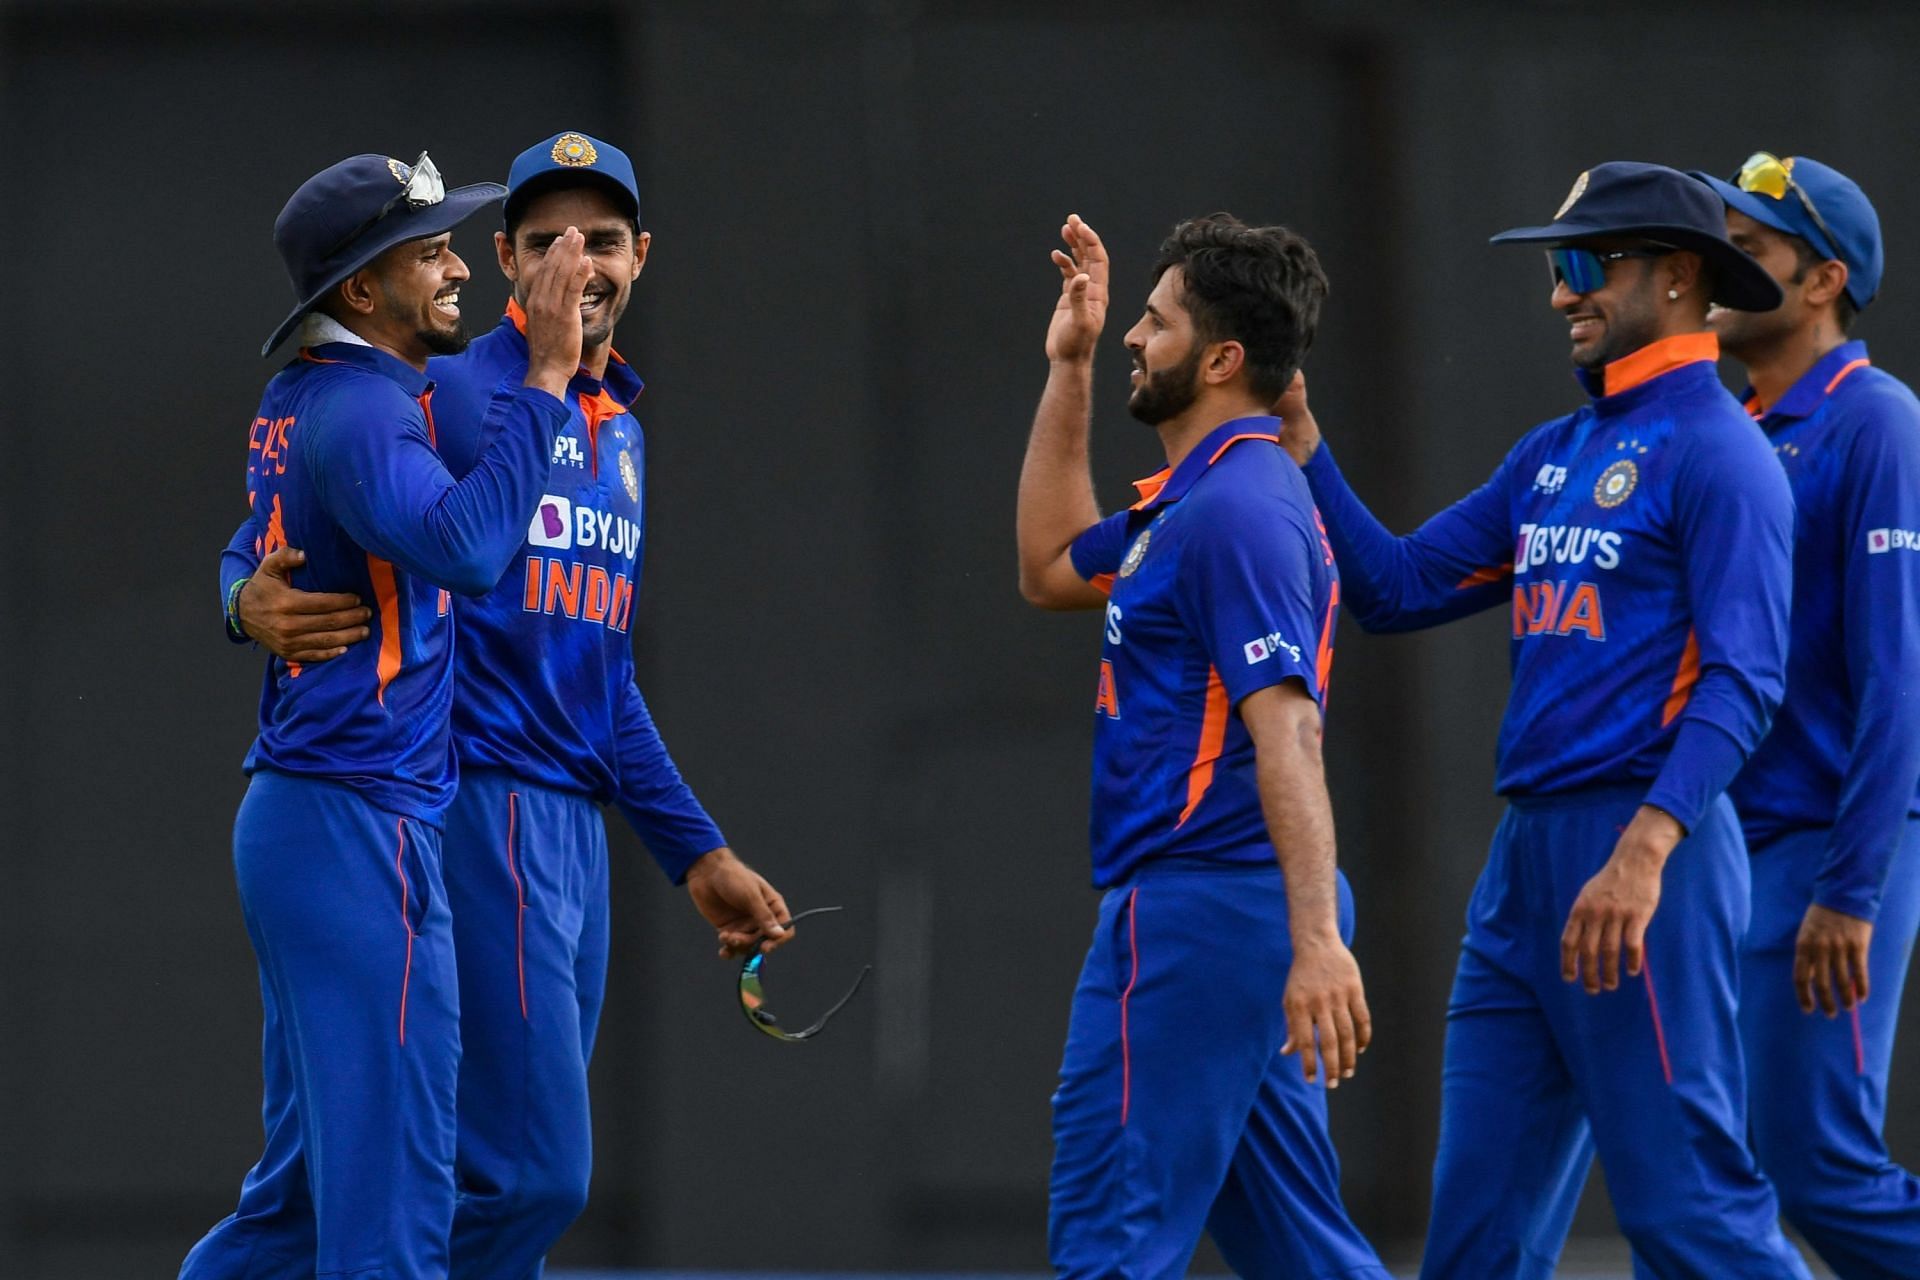 The men in blue emerged victorious by three runs. (Image Credits: Getty)